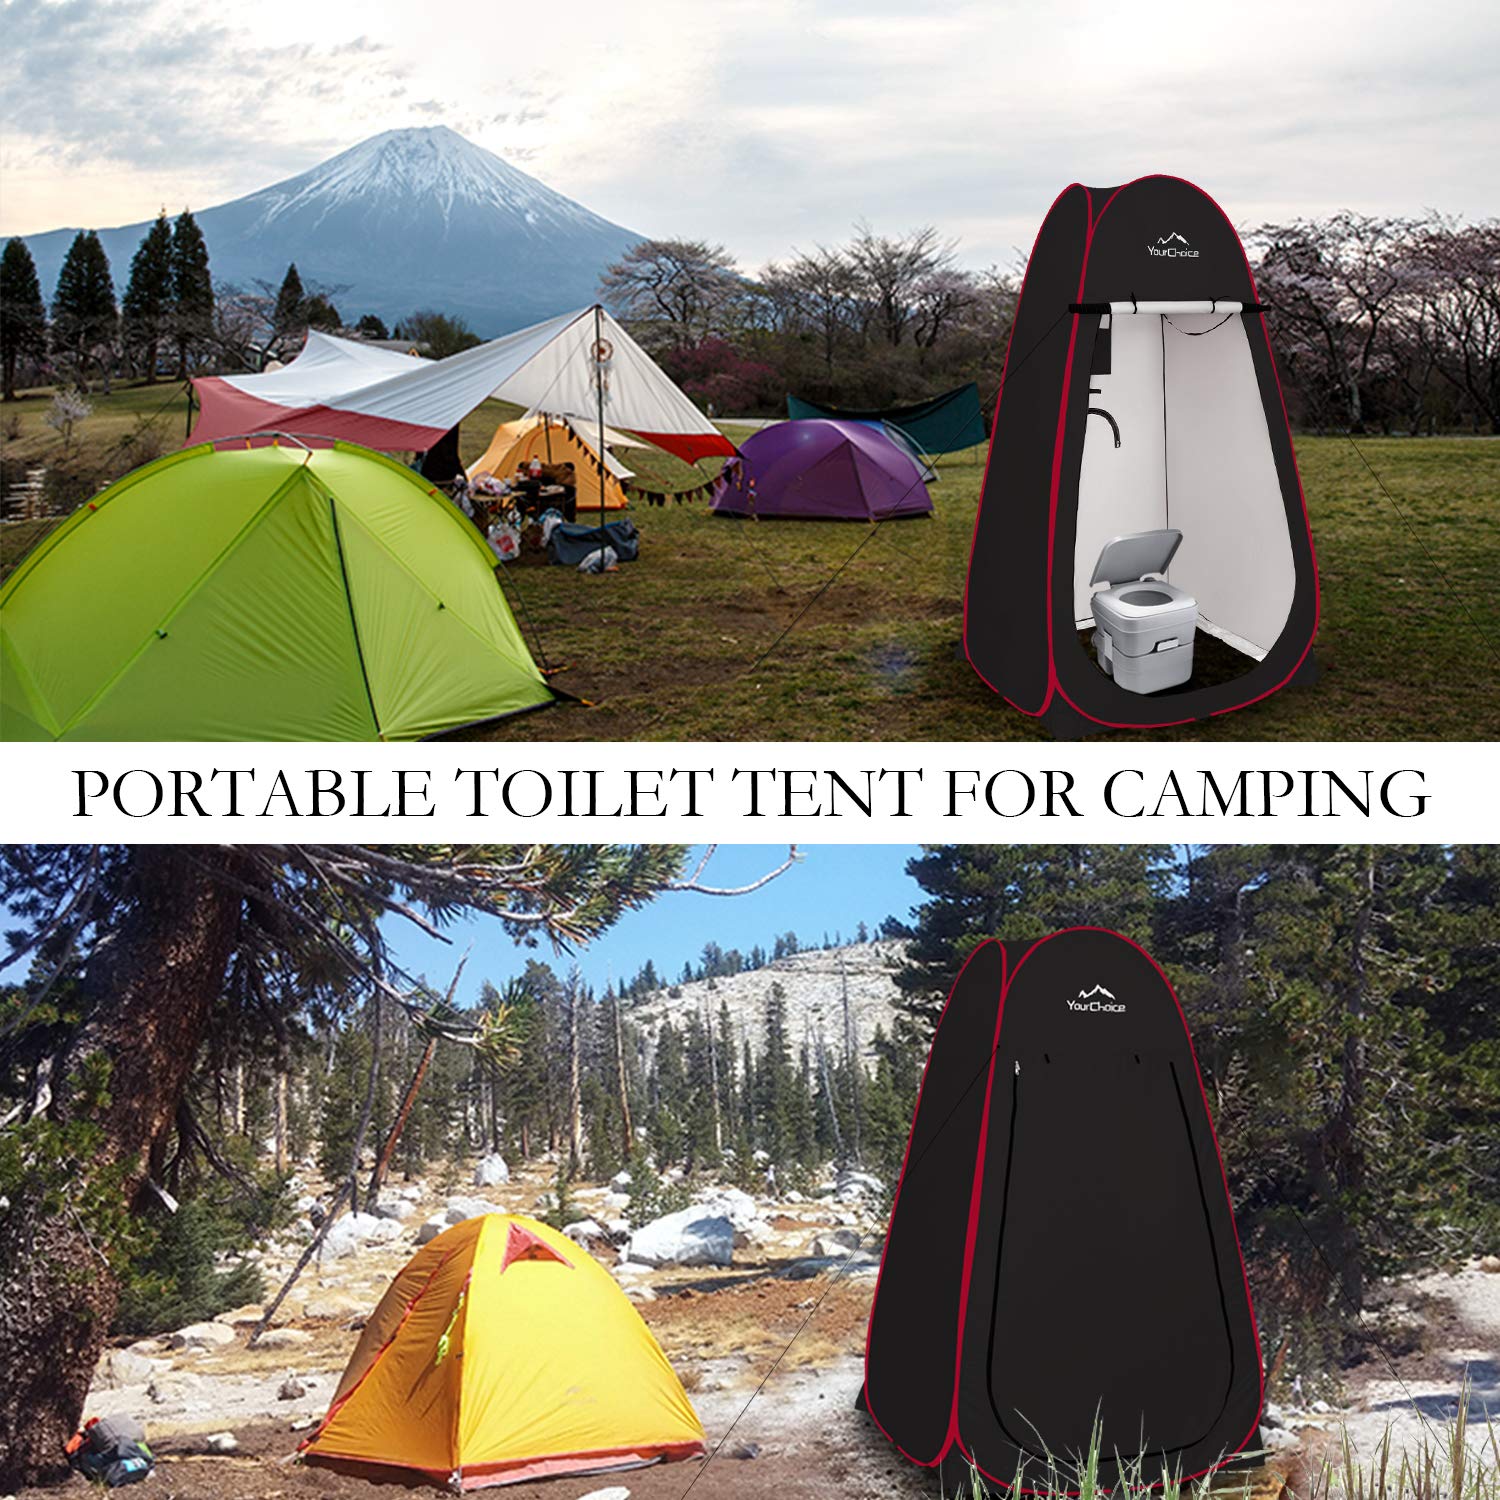 Your Choice Oversized 6.89FT Pop Up Privacy Tent - Camping Shower Changing Tent, Portable Bathroom Toilet Room - Color Black